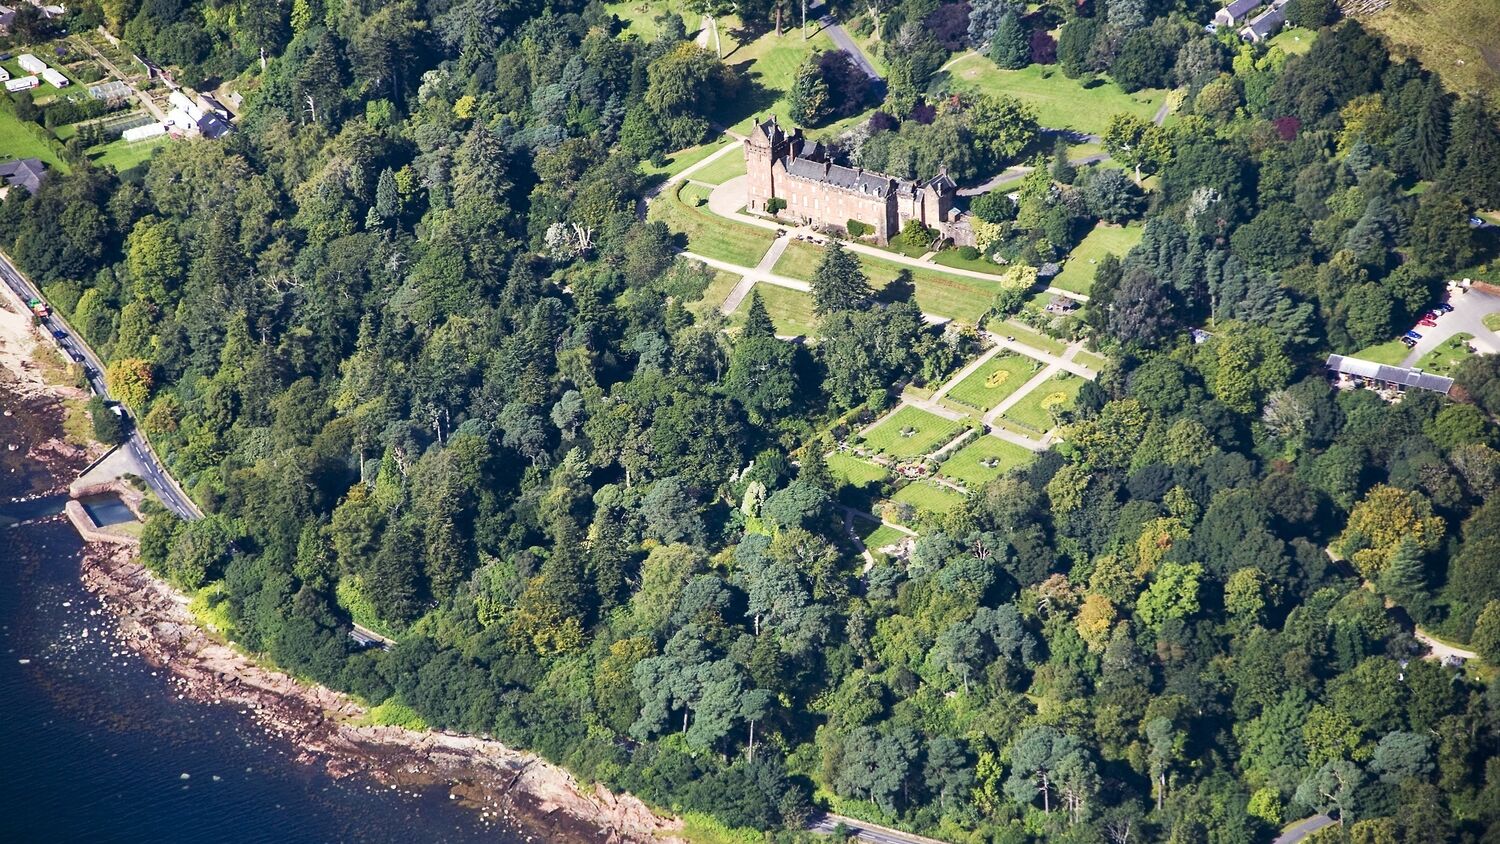 An aerial view of Brodick Castle, Garden and Country Park on Arran. The glistening blue bay can be seen in the bottom left corner. The castle can be seen with the garden in front, all surrounded by green woodland.